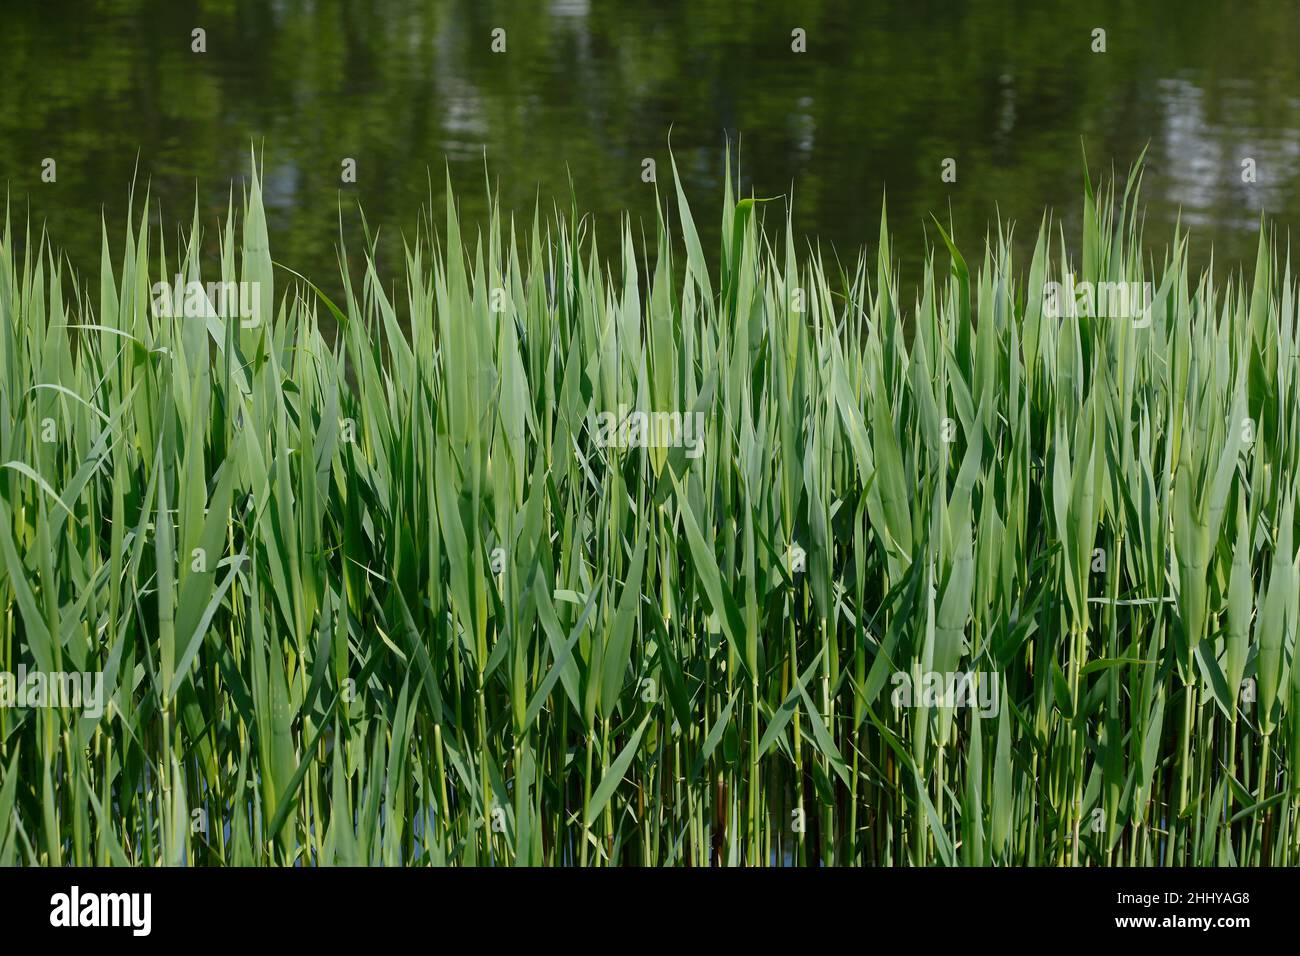 Reeds, grasses on a lake shore Stock Photo